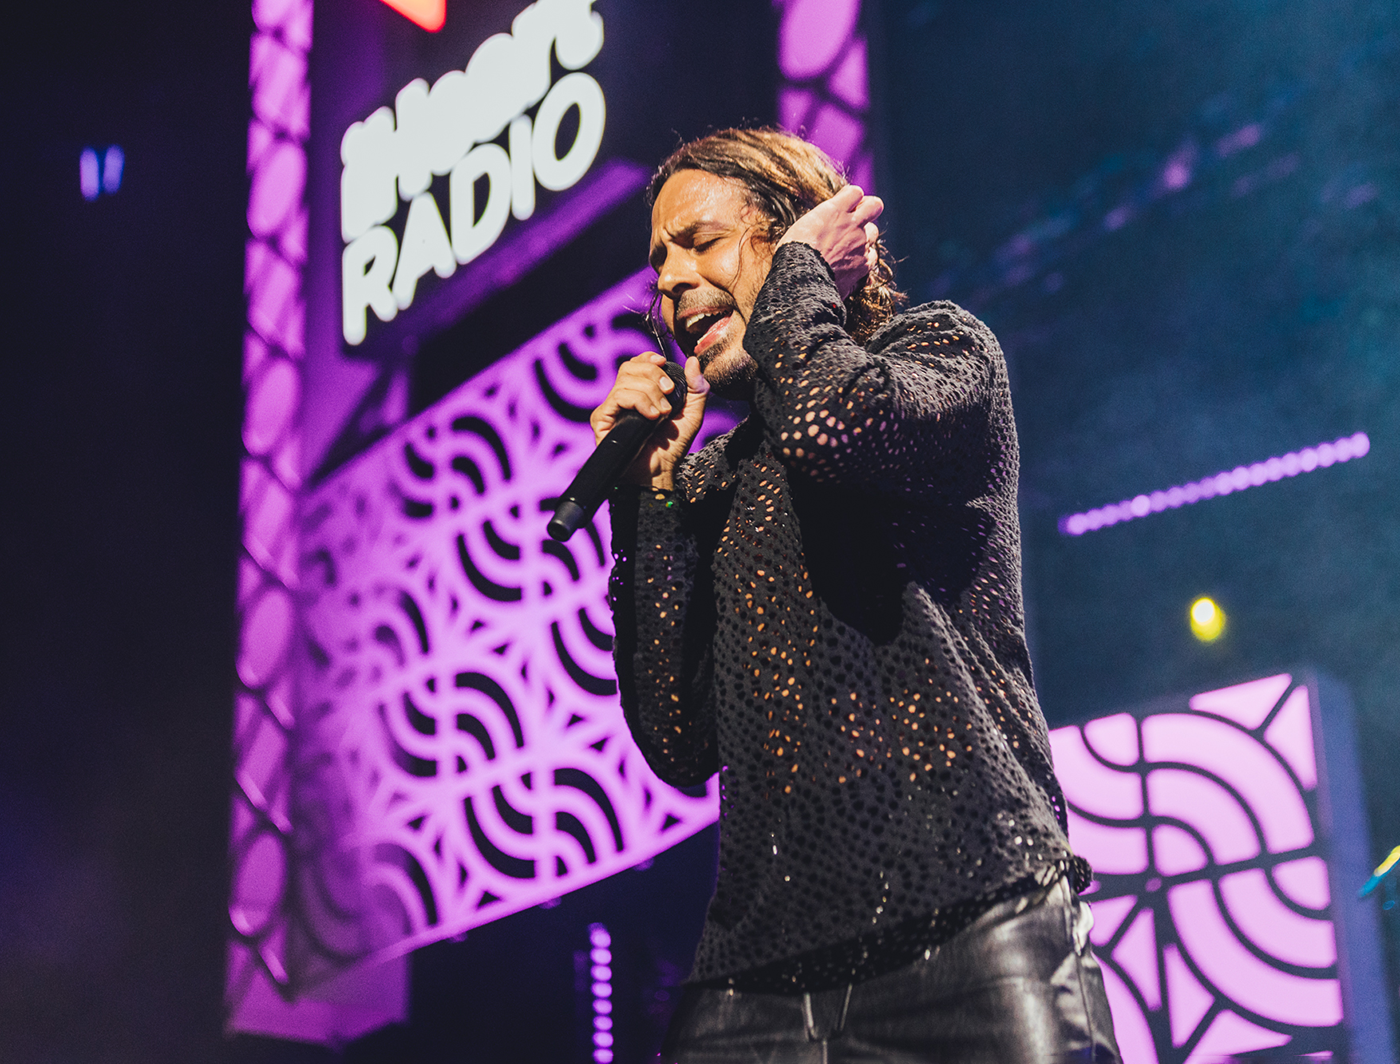 Flow panels dressed the stage at the 2023 iHeartRadio Fiesta Latina event